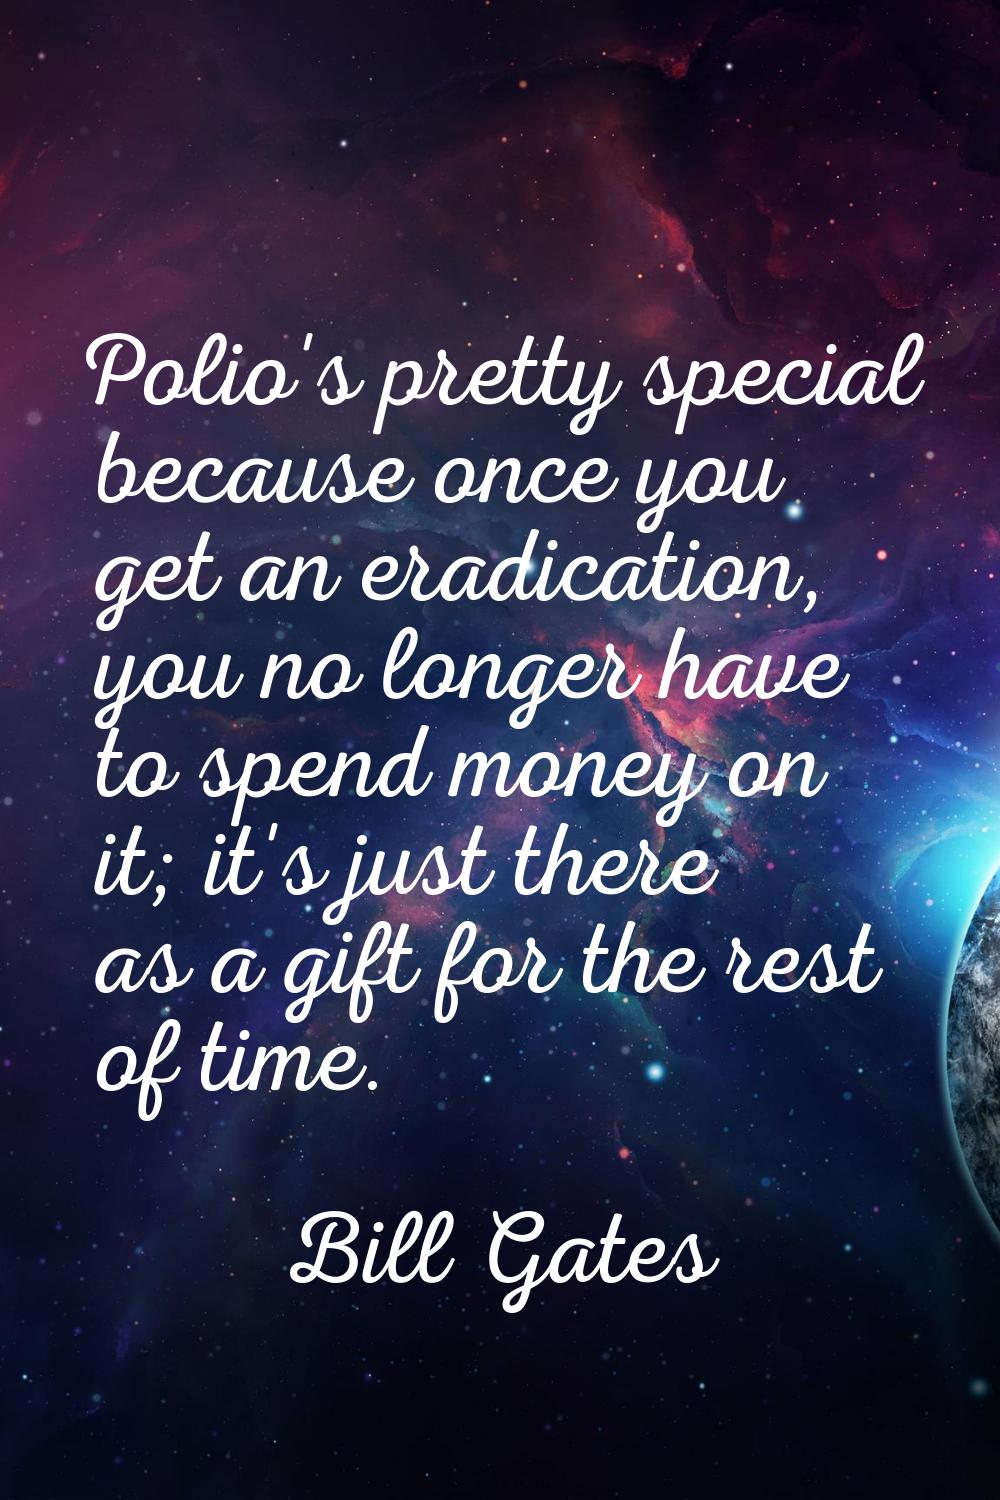 Polio's pretty special because once you get an eradication, you no longer have to spend money on it